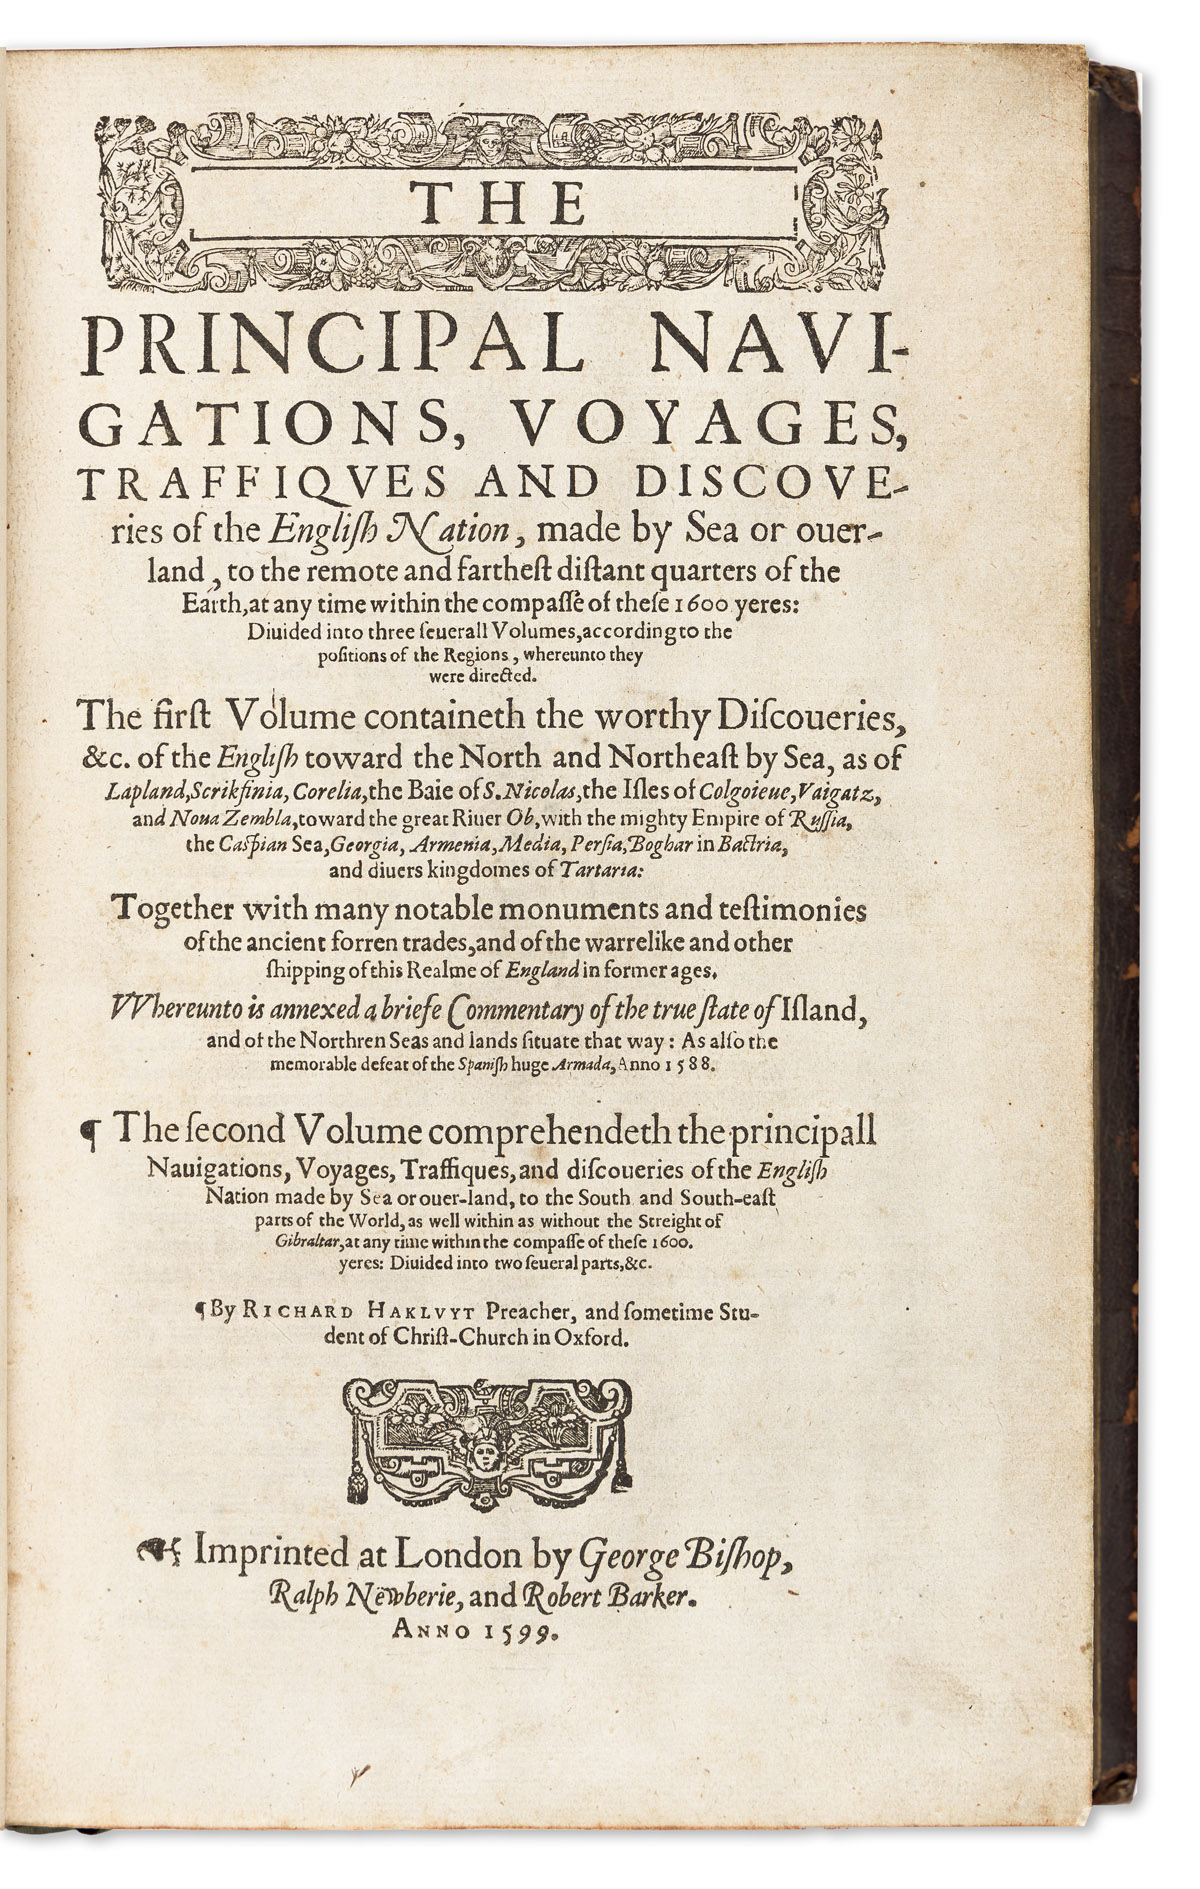 Hakluyt, Richard (1552?-1616) The Principal Navigations, Voyages, Traffiques and Discoveries of the English Nation Made by Sea or Over-